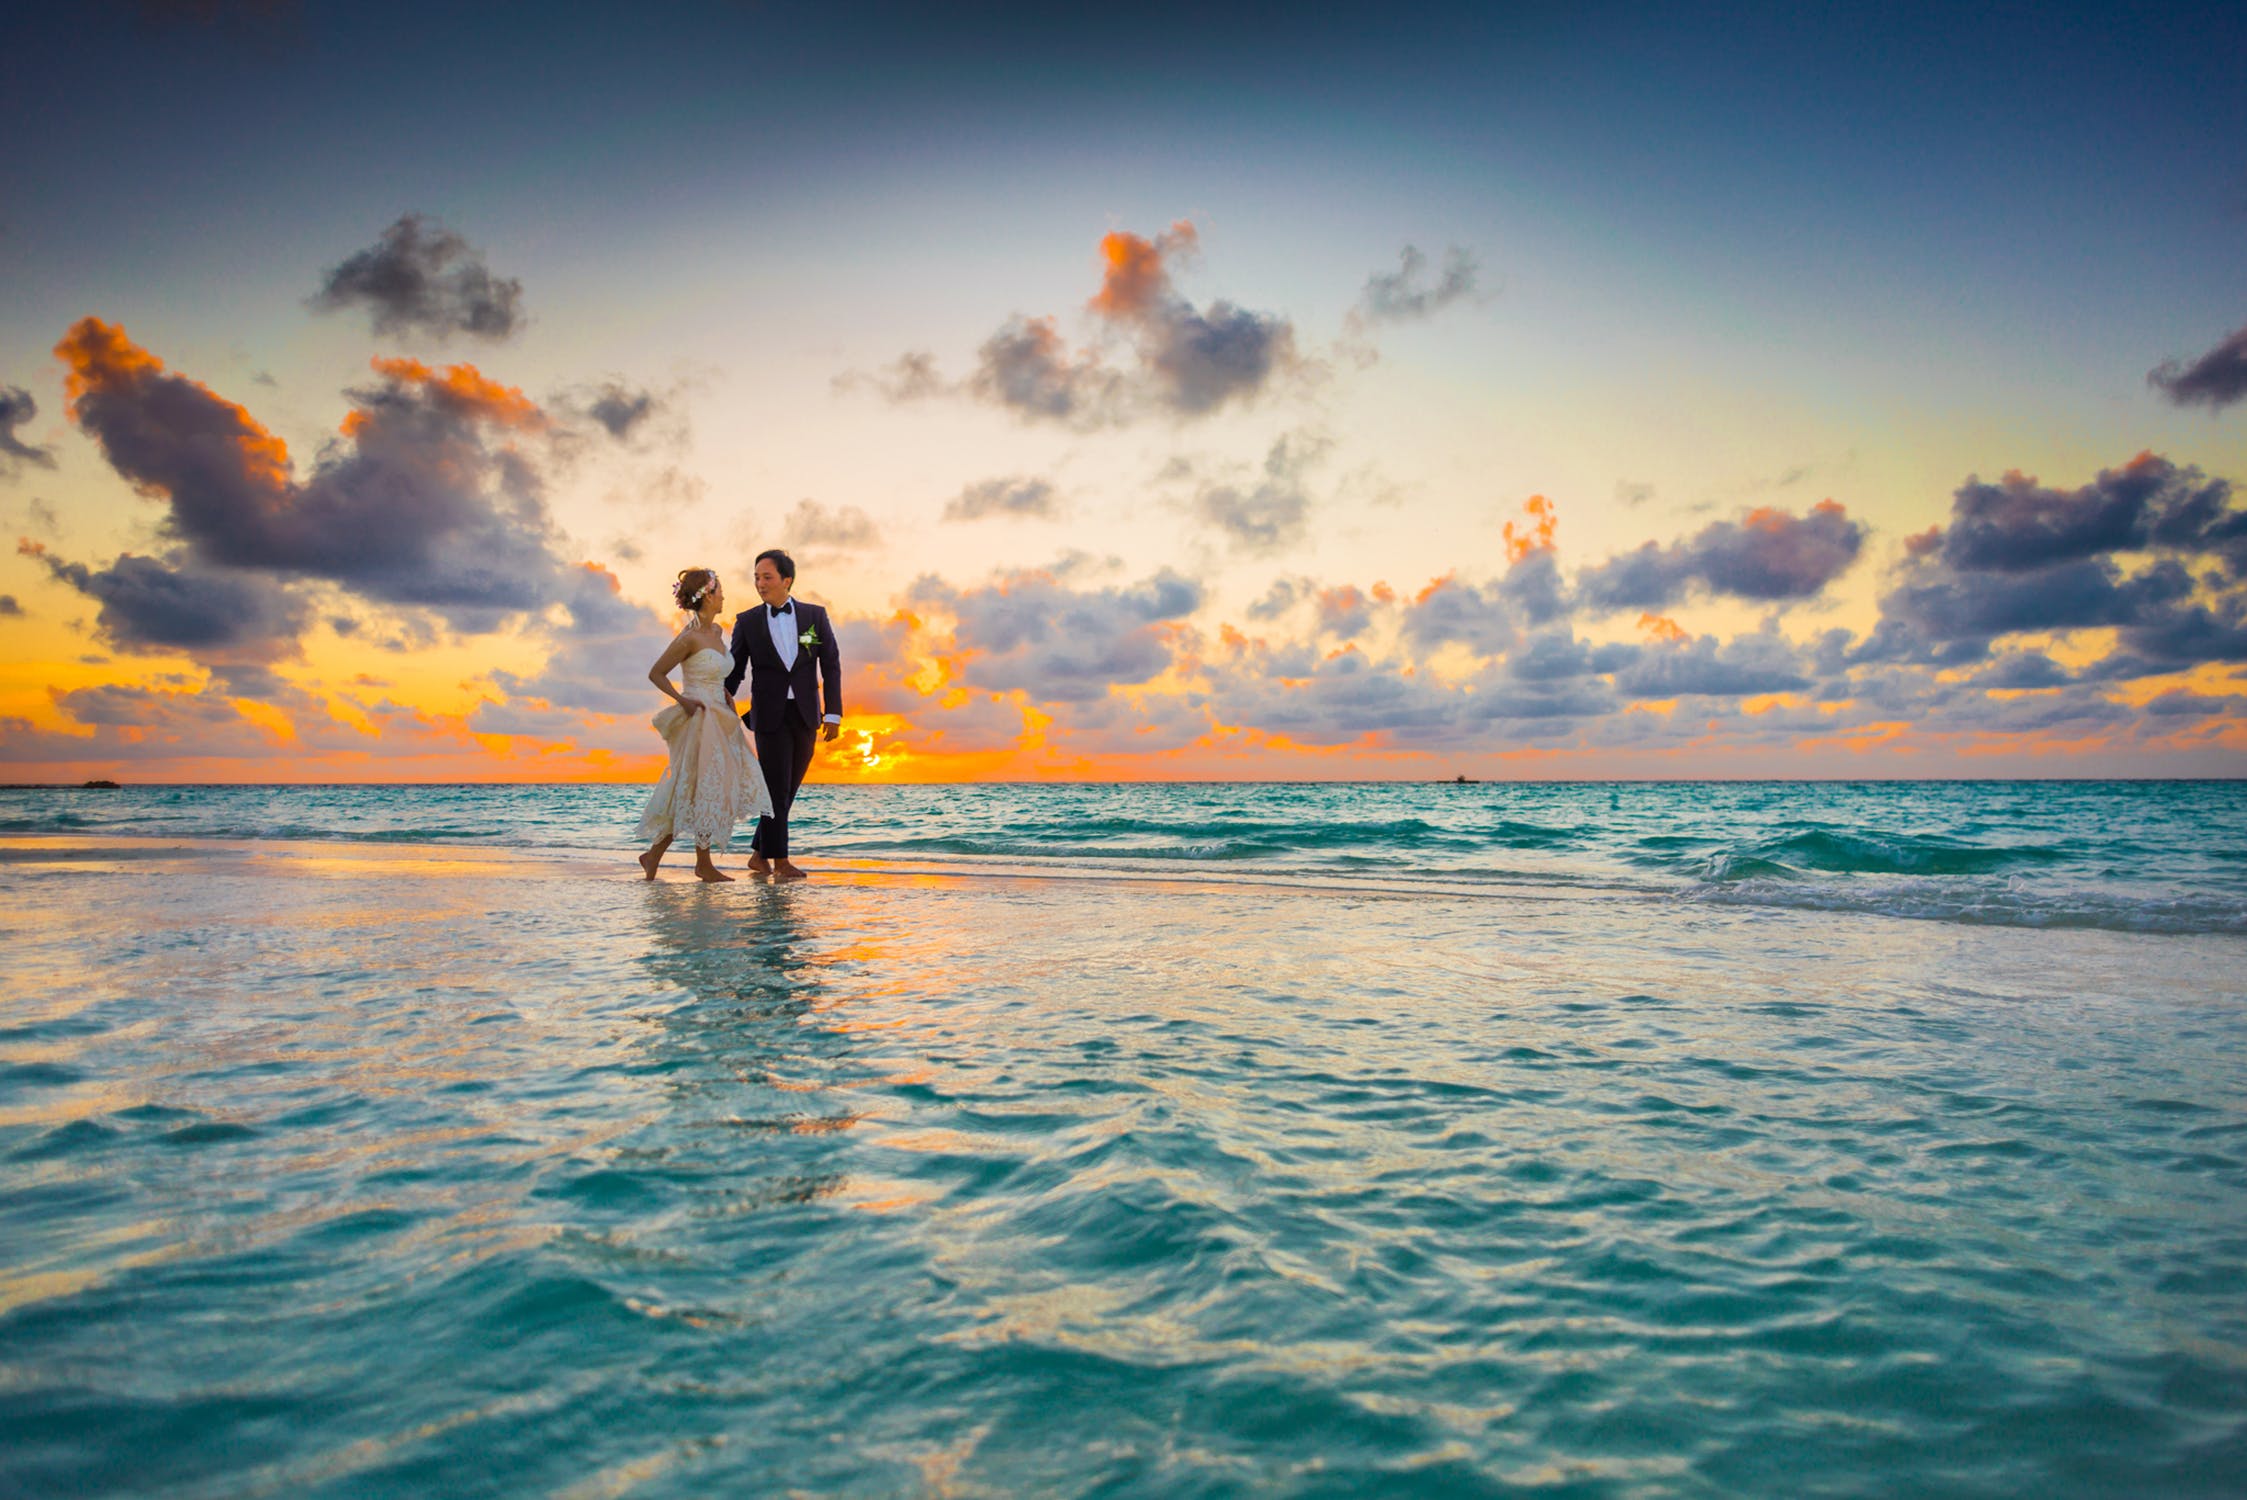 How to Plan the Tropical Honeymoon of Your Dreams